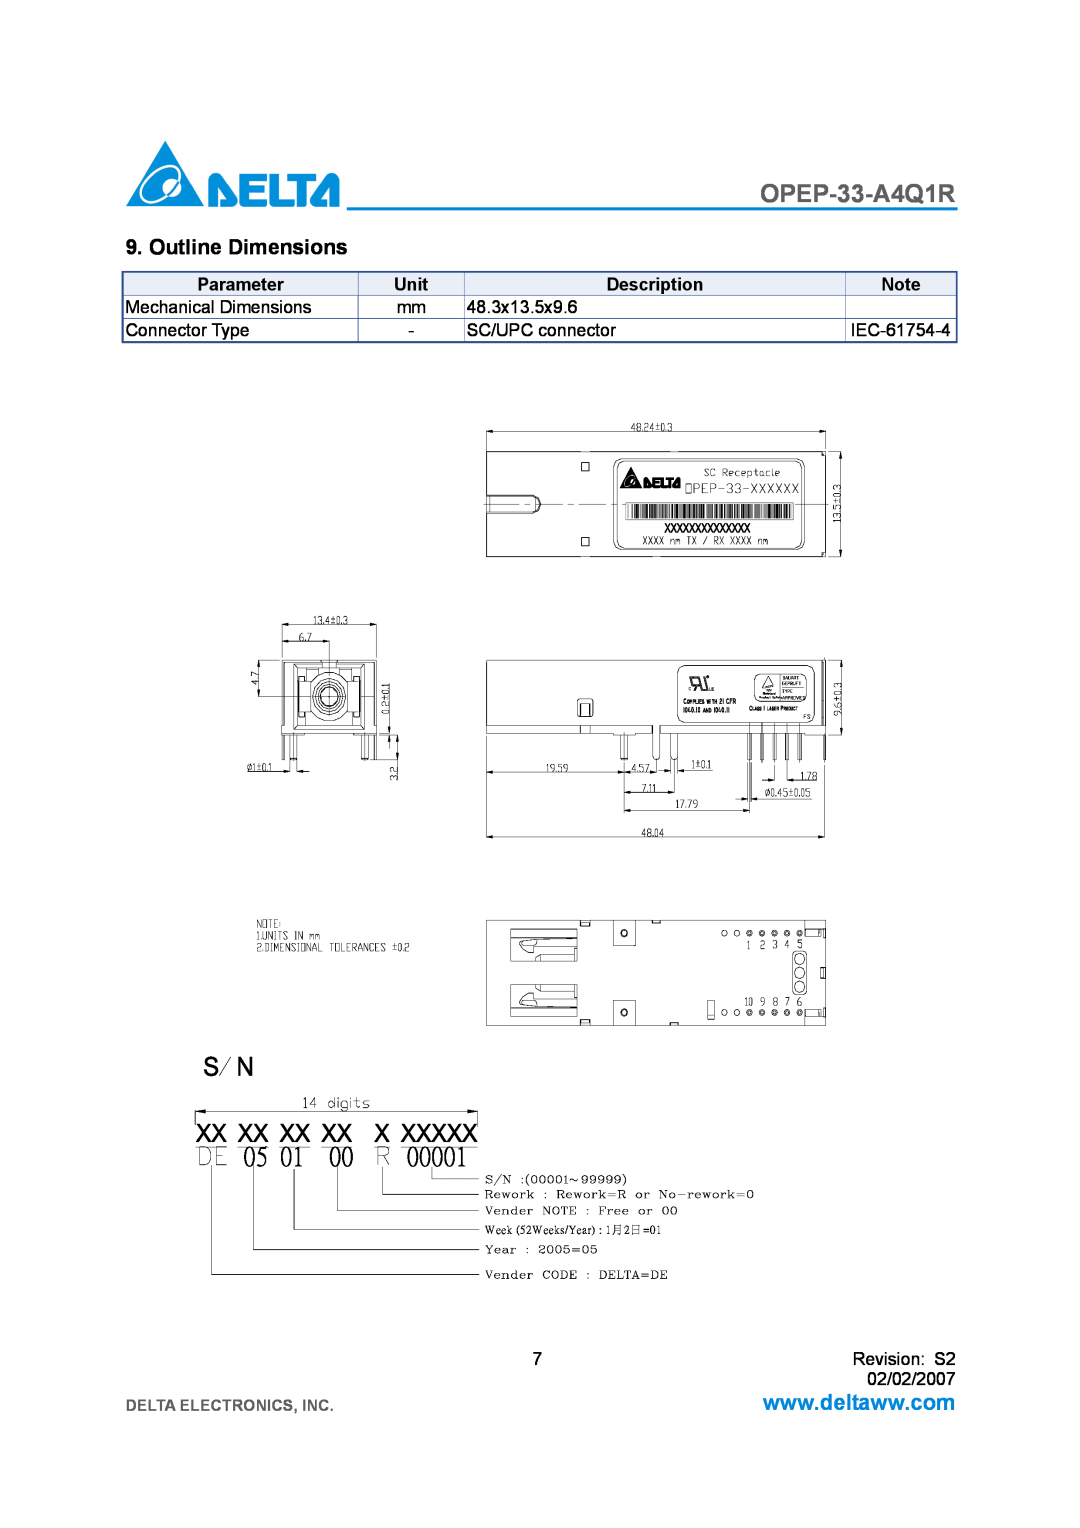 Delta Electronics OPEP-33-A4Q1R manual Outline Dimensions, Delta Electronics, Inc, W eek 52W eeks/Year 1月 2日 =01 